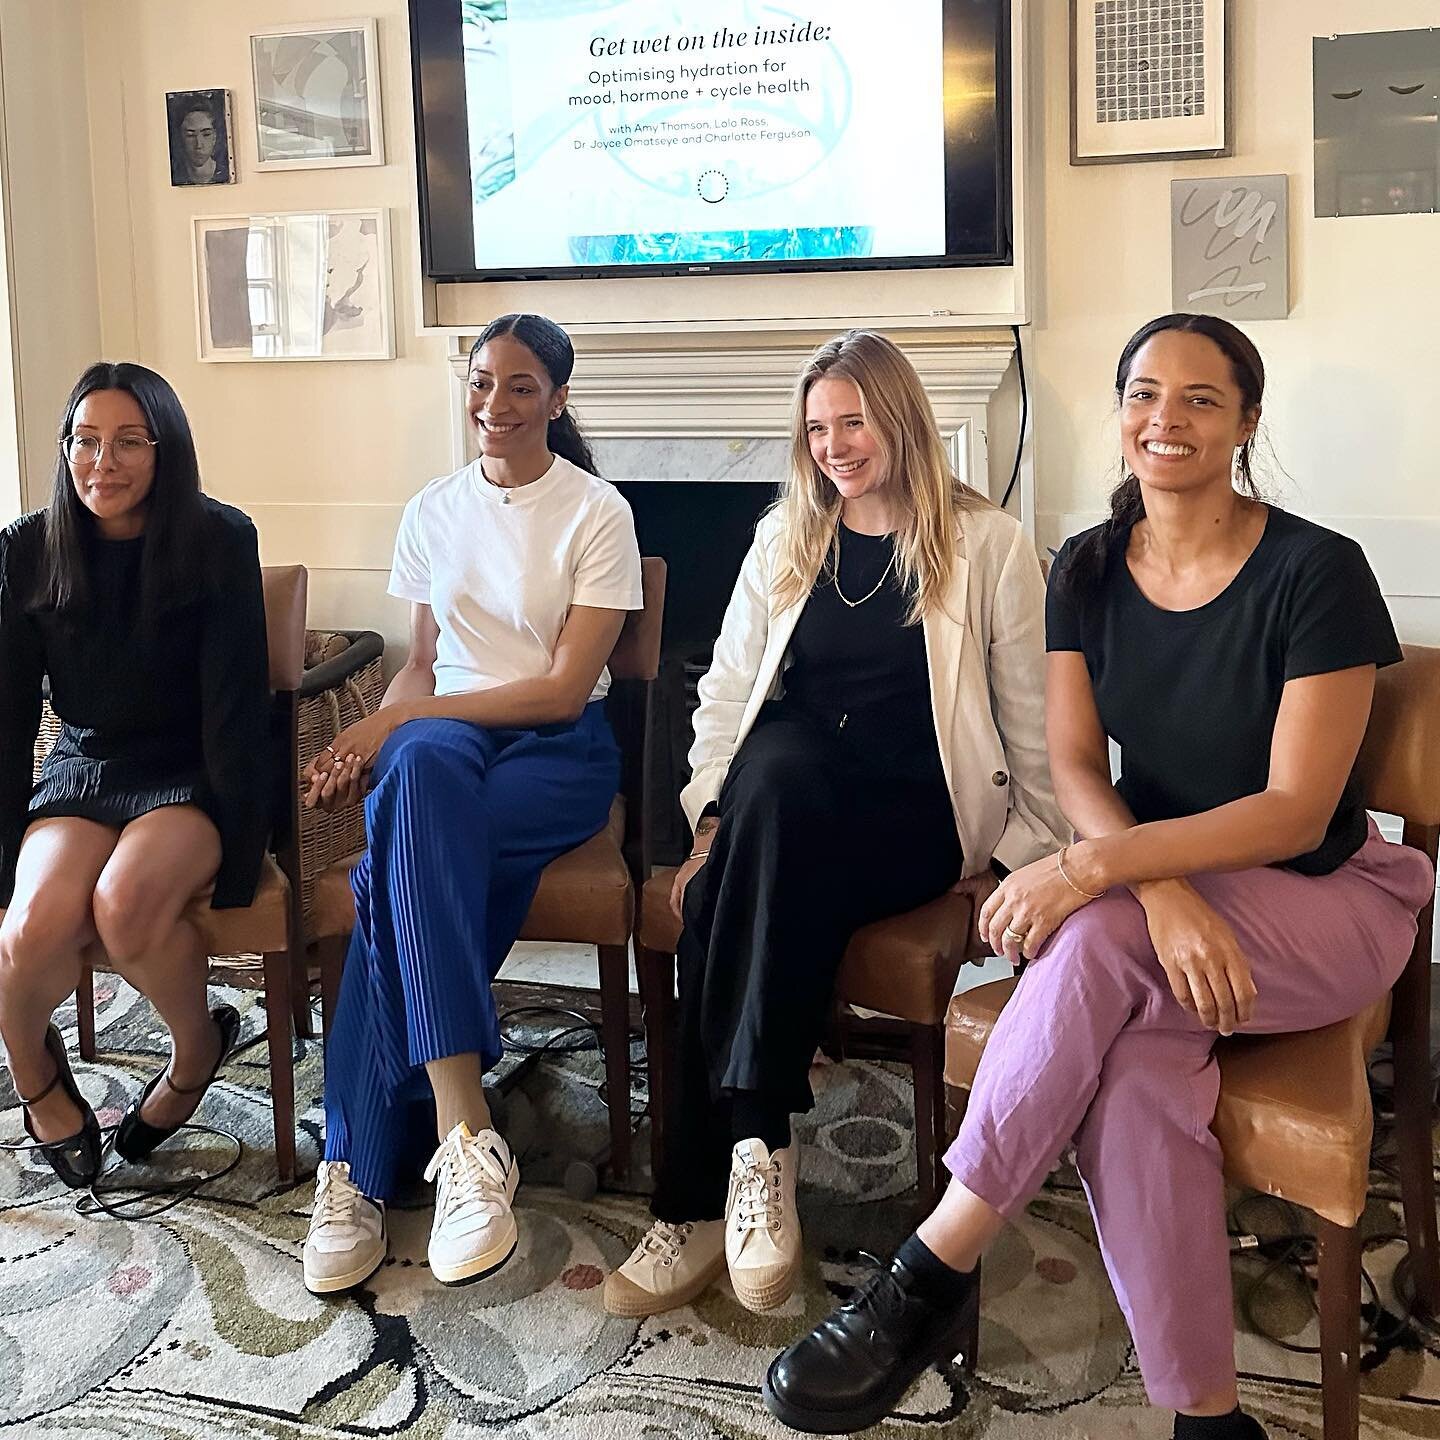 The science of hydration for mood, hormone and skin health &hellip;

A @moodymonth talk with the wonderful @disciplelondon @signed.drj &amp; @amytstory

You can learn more about optimising hydration for mood health, hormones and outer radiance  in th